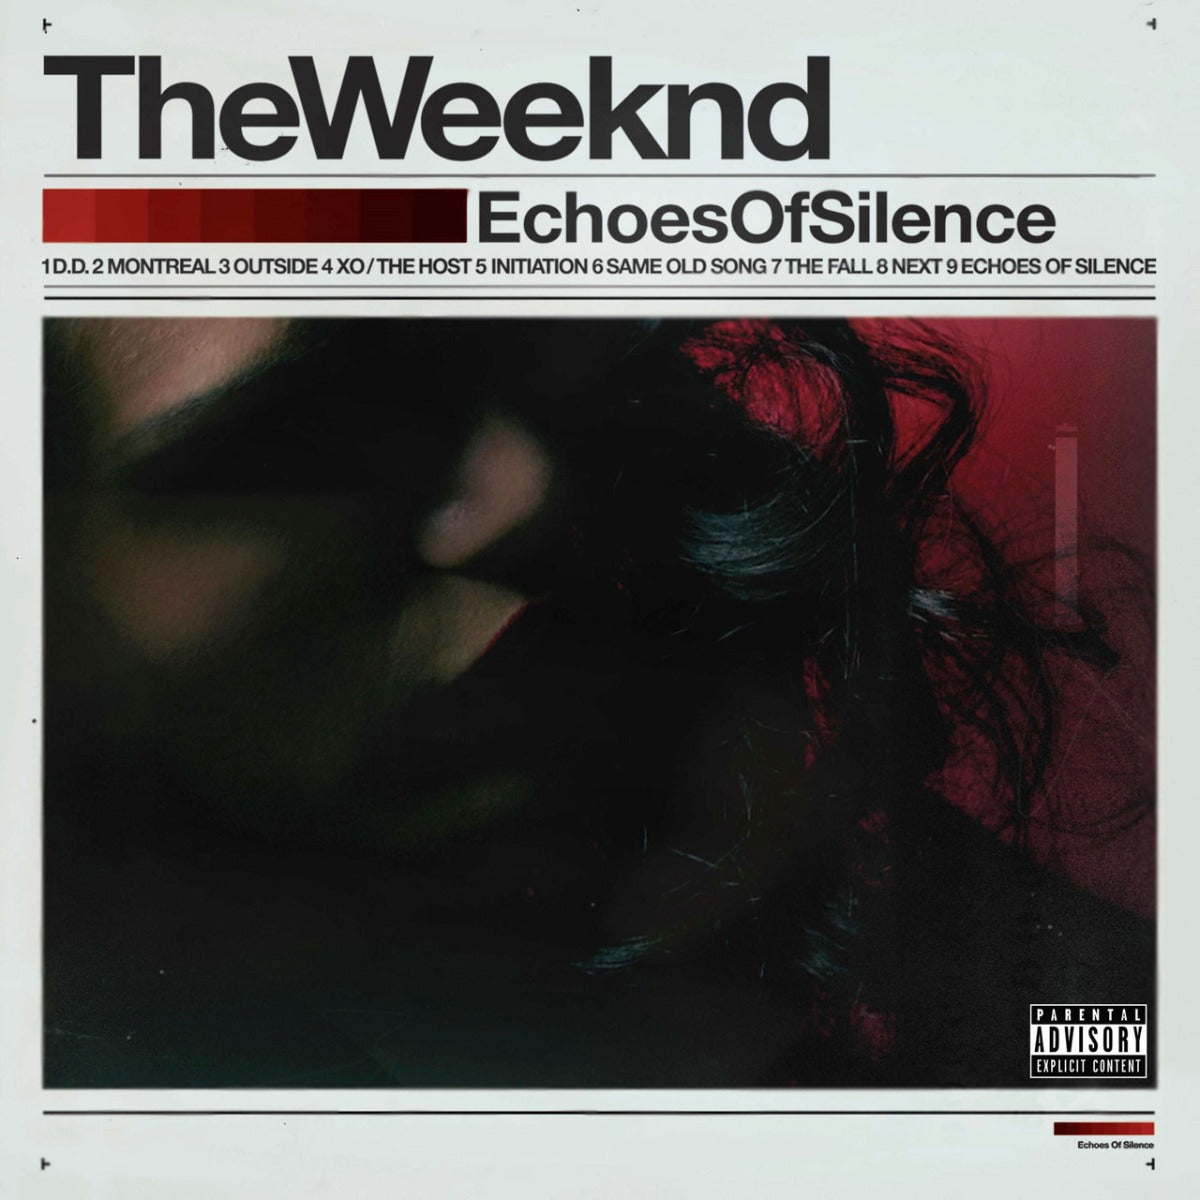 The Weeknd - Echoes Of Silence (Decade Collectors Edition) 2LP - Vinyl